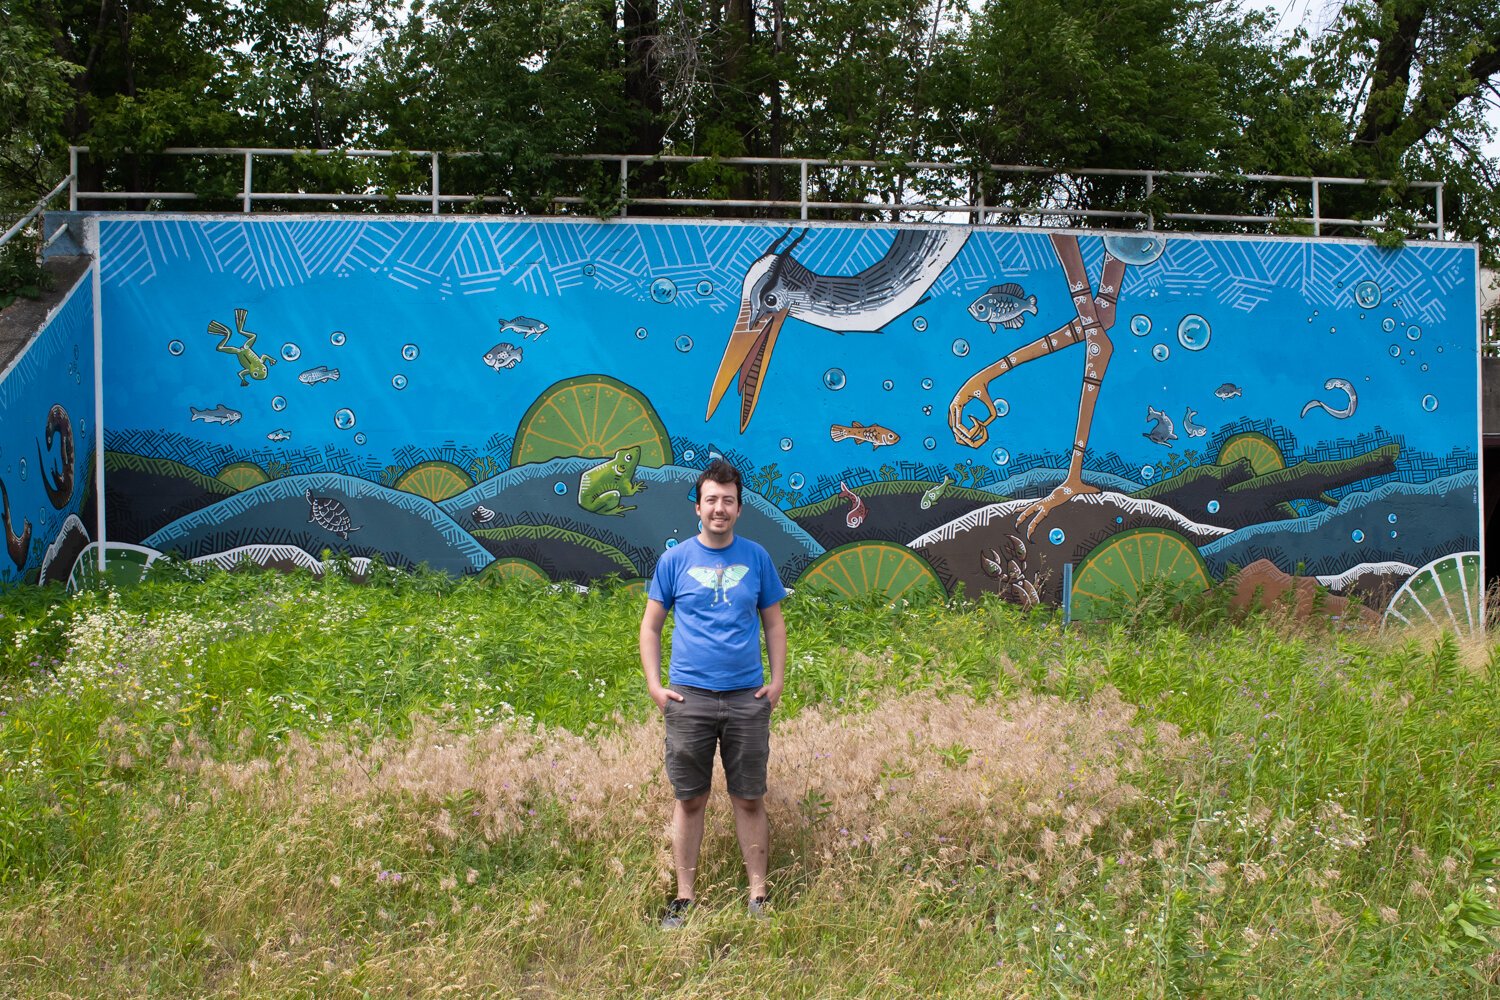 Jeremy Stroup painted an Art This Way mural of his own called “Blue Diver” in 2020 on a railroad underpass at Grand and Calhoun Streets.